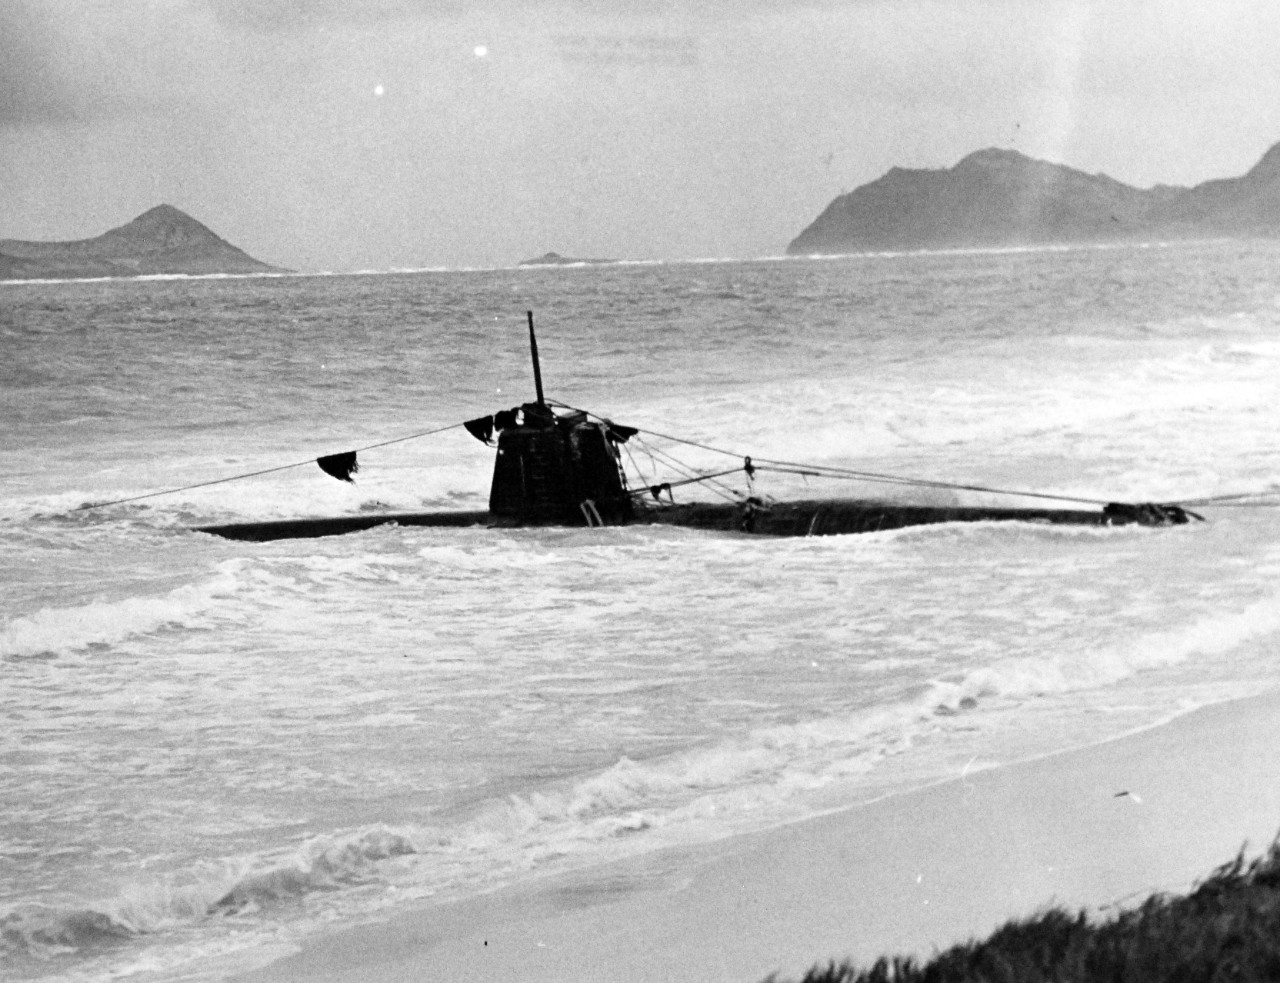 80-G-32680:   Pearl Harbor Attack, December 7, 1941.    HA-19.  (Japanese "Type A" midget submarine).  Beached in eastern Oahu, after it unsuccessfully attempted to enter Pearl Harbor during the attack.  The photograph was taken on or shortly after 8 December 1941. Official U.S. Navy photograph, now in the collections of the National Archives.  (7/2/2014).